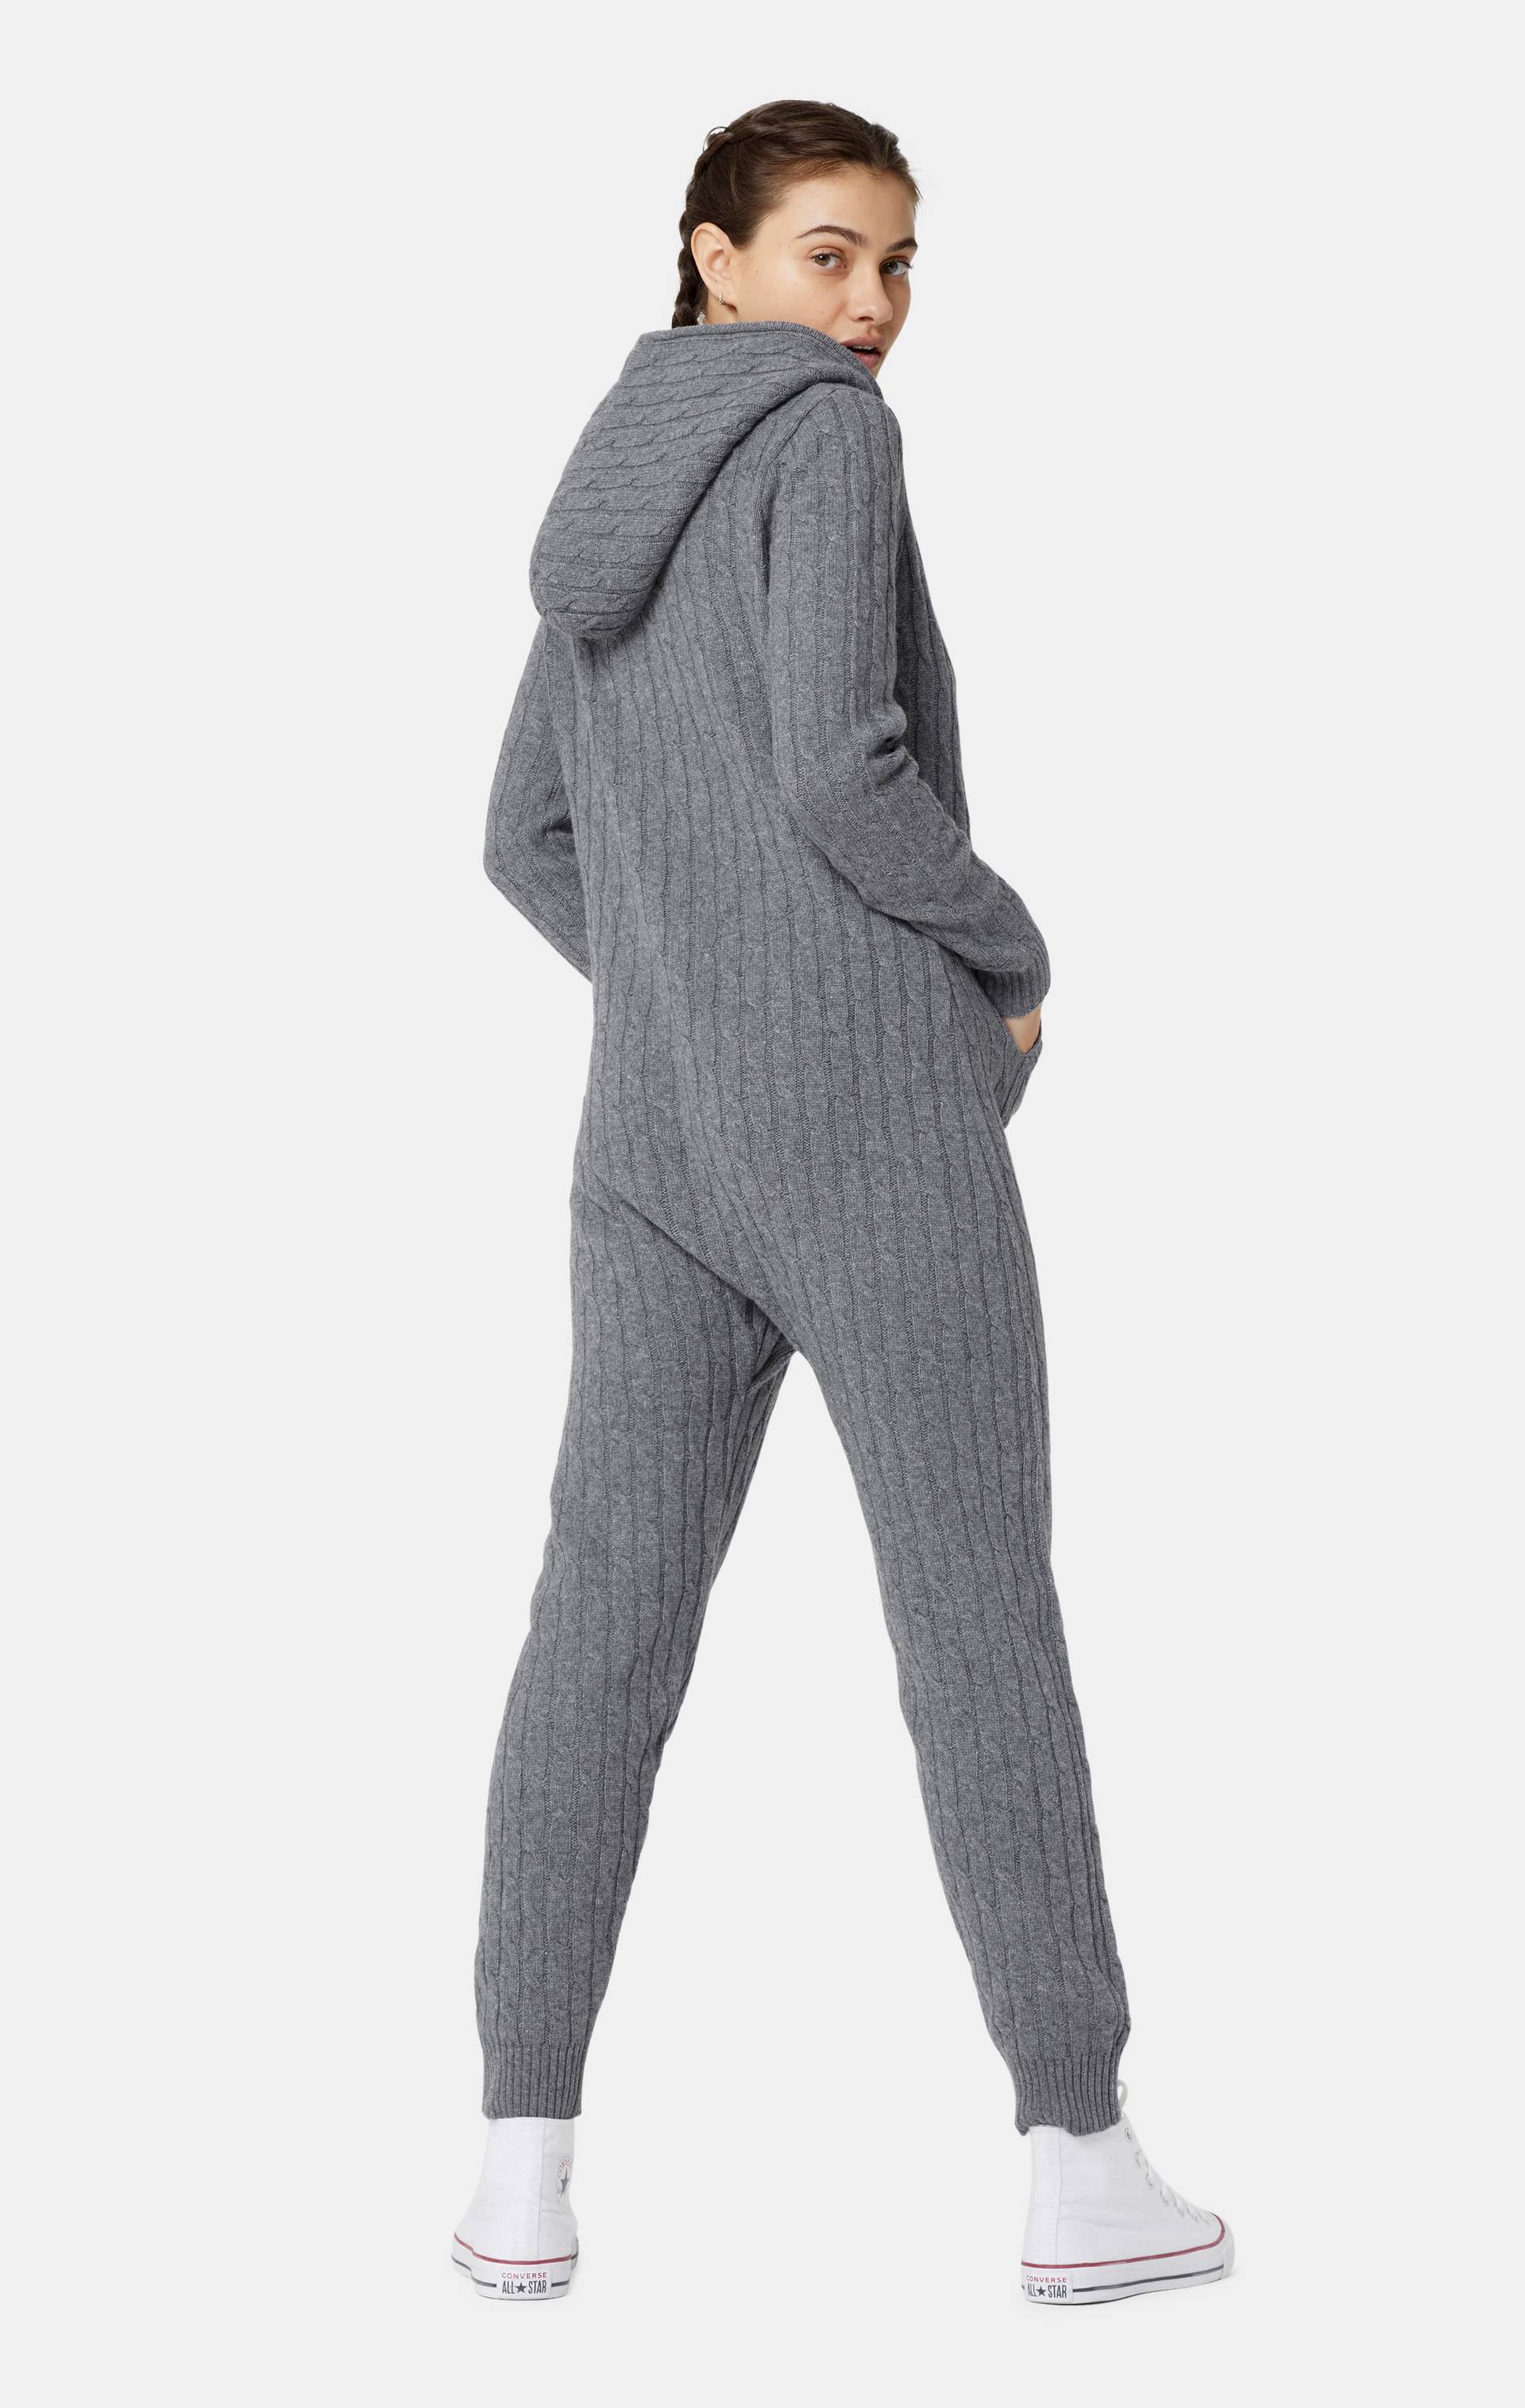 Onepiece Cable Knit Jumpsuit Dark Grey - 13